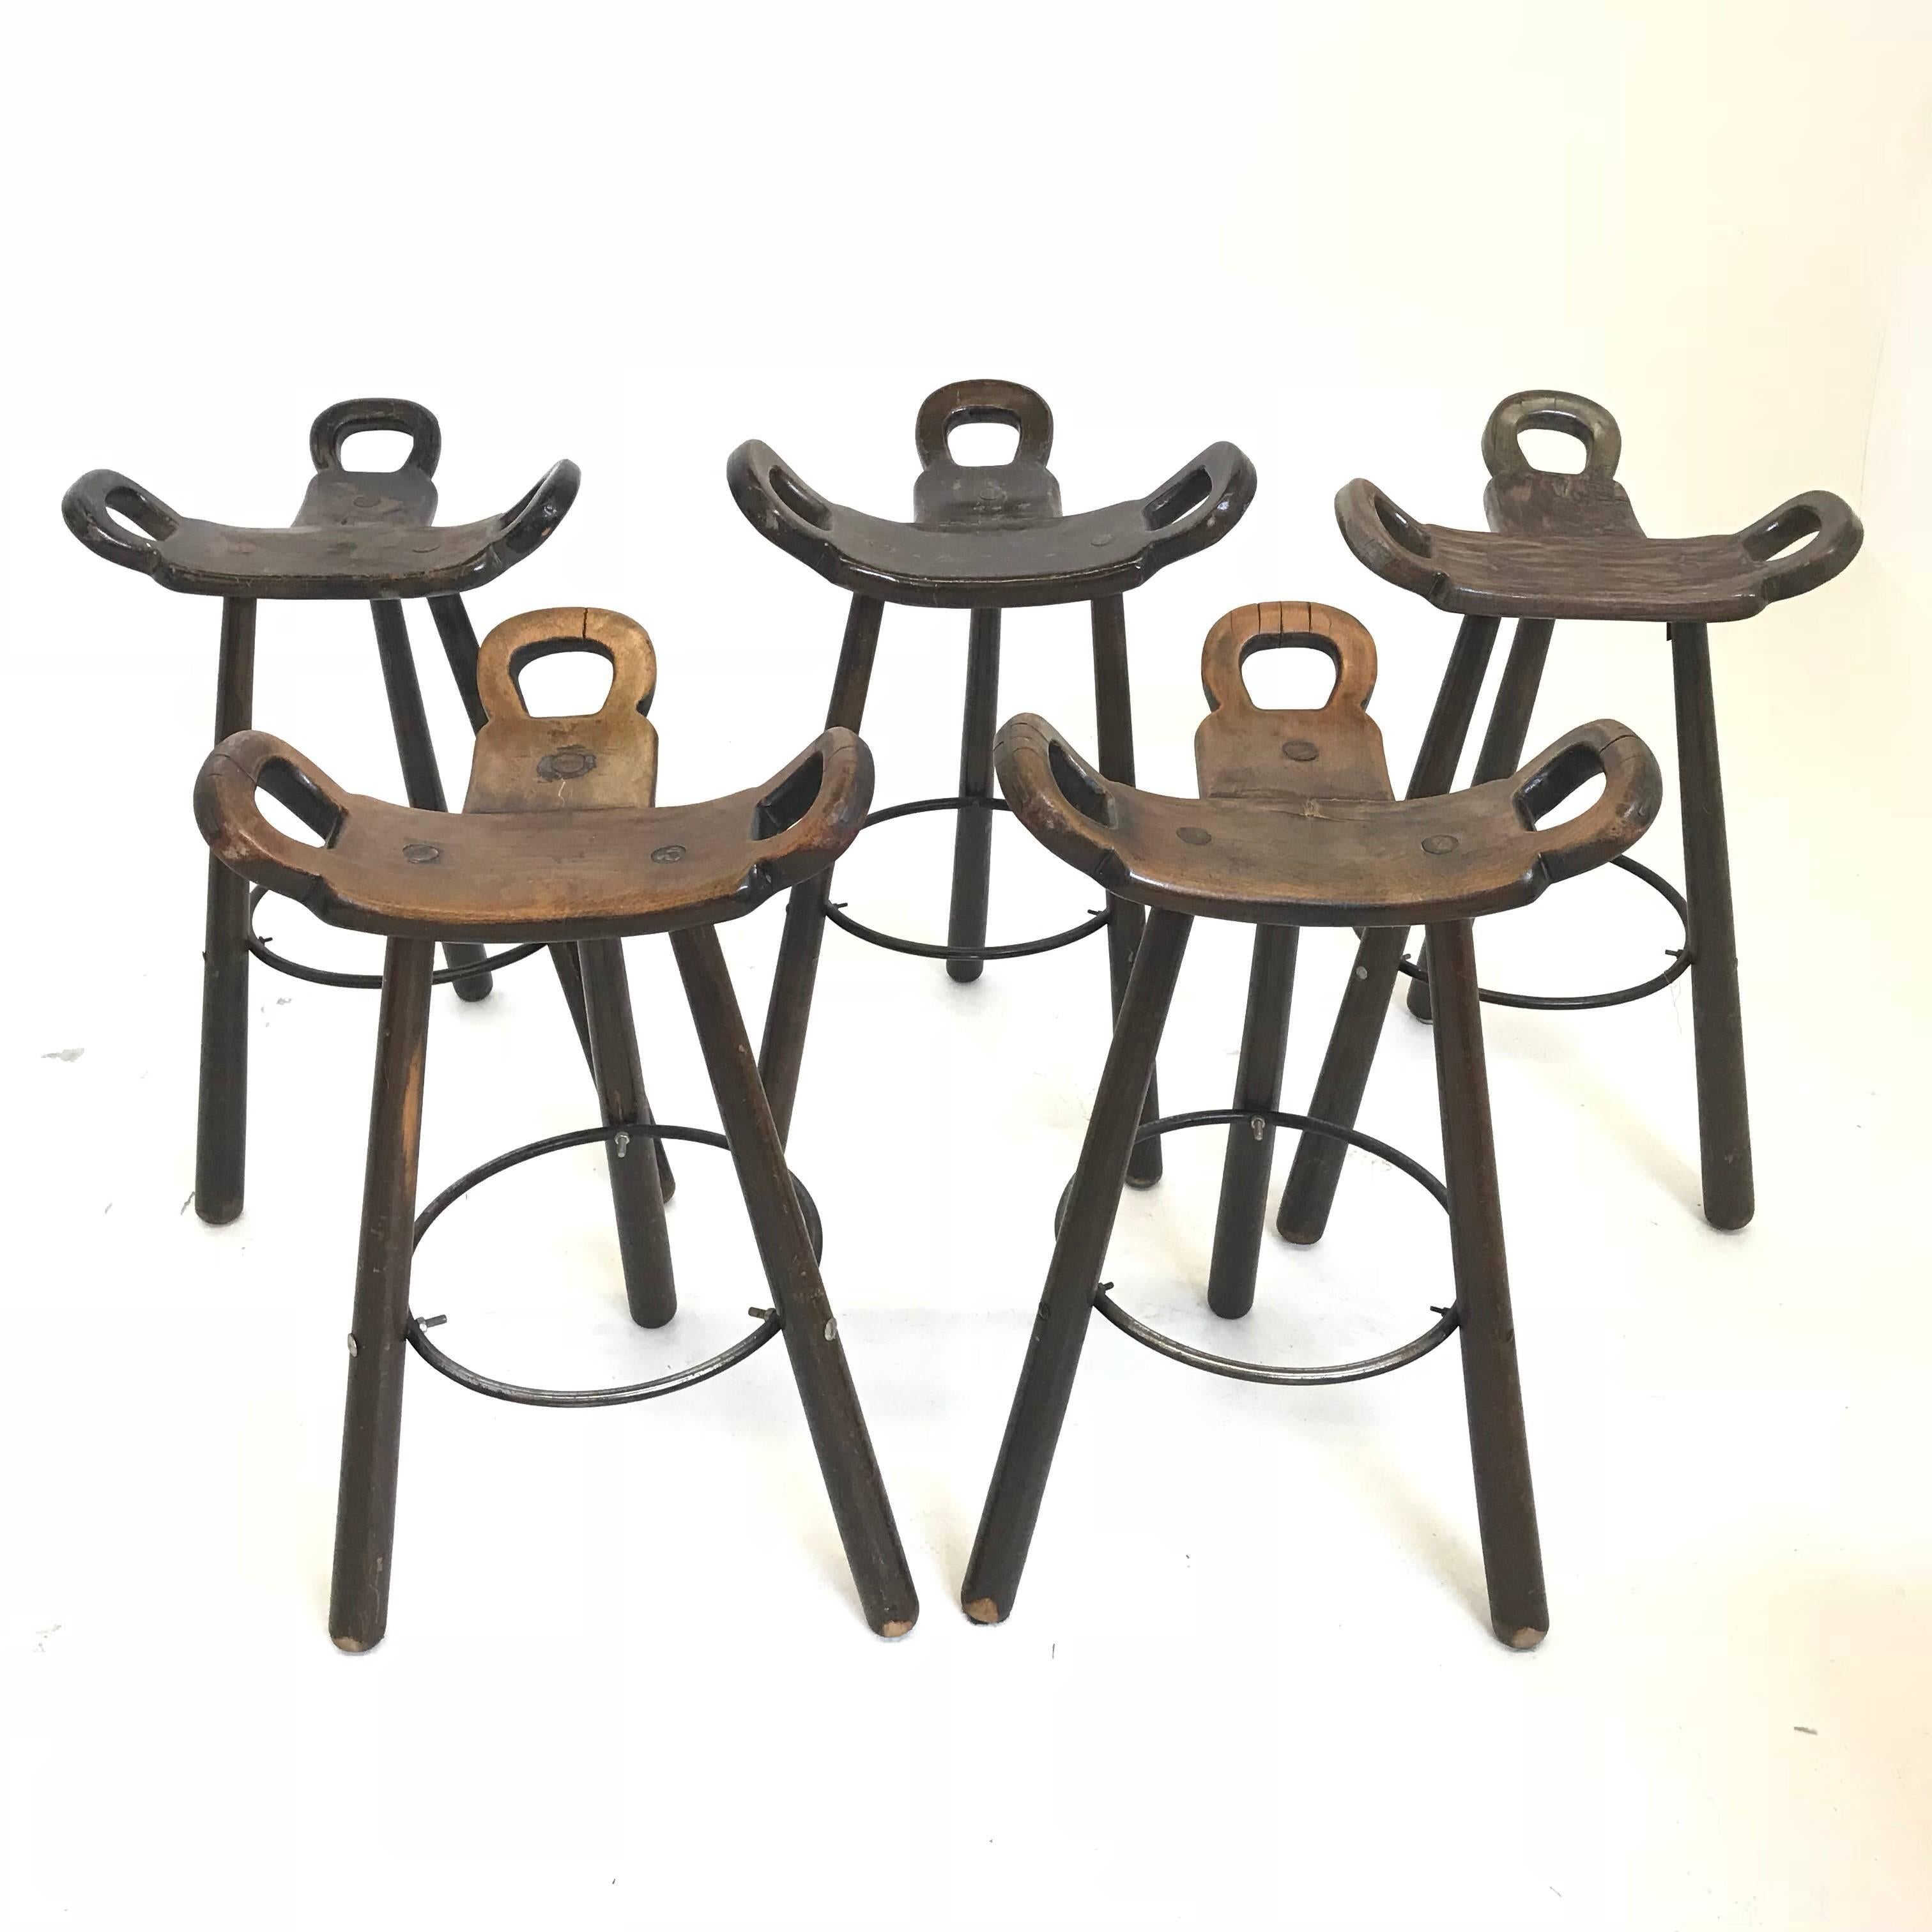 Set of five 'Brutalist' or 'Marbella' bar stools, in stained beech and metal, Spain, 1970s. A curved T-shape with three handles. The curved form makes sure the stool has a stabile seat, emphasized by the metal ring as footrest.